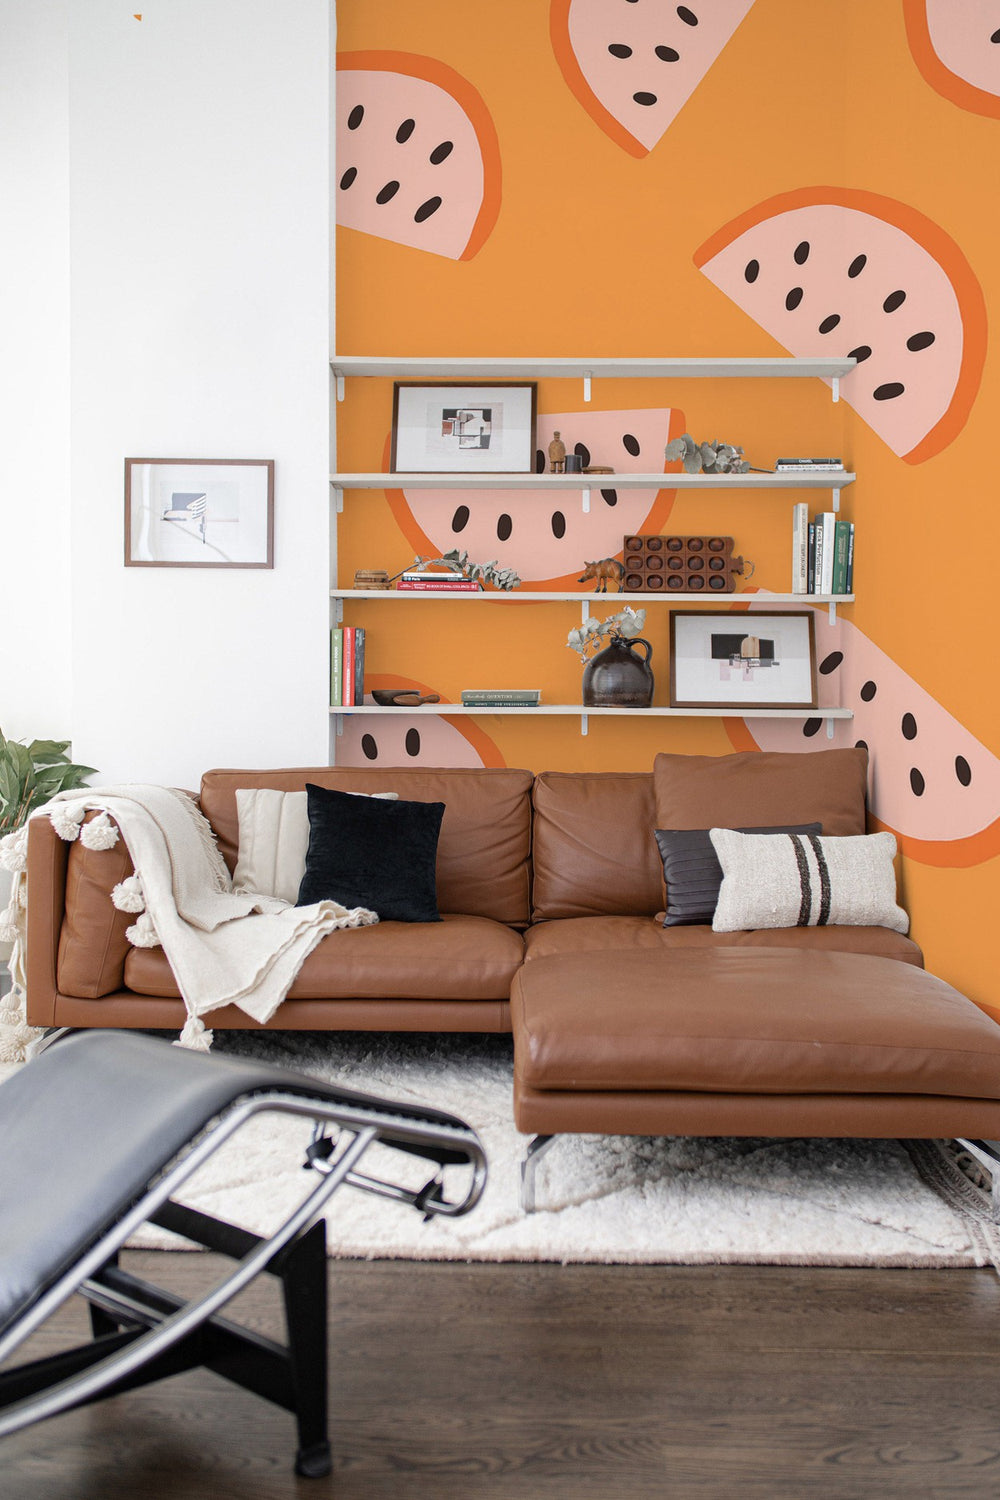 Contemporary living room interior with orange abstract wall mural, leather sofa, and shelving unit